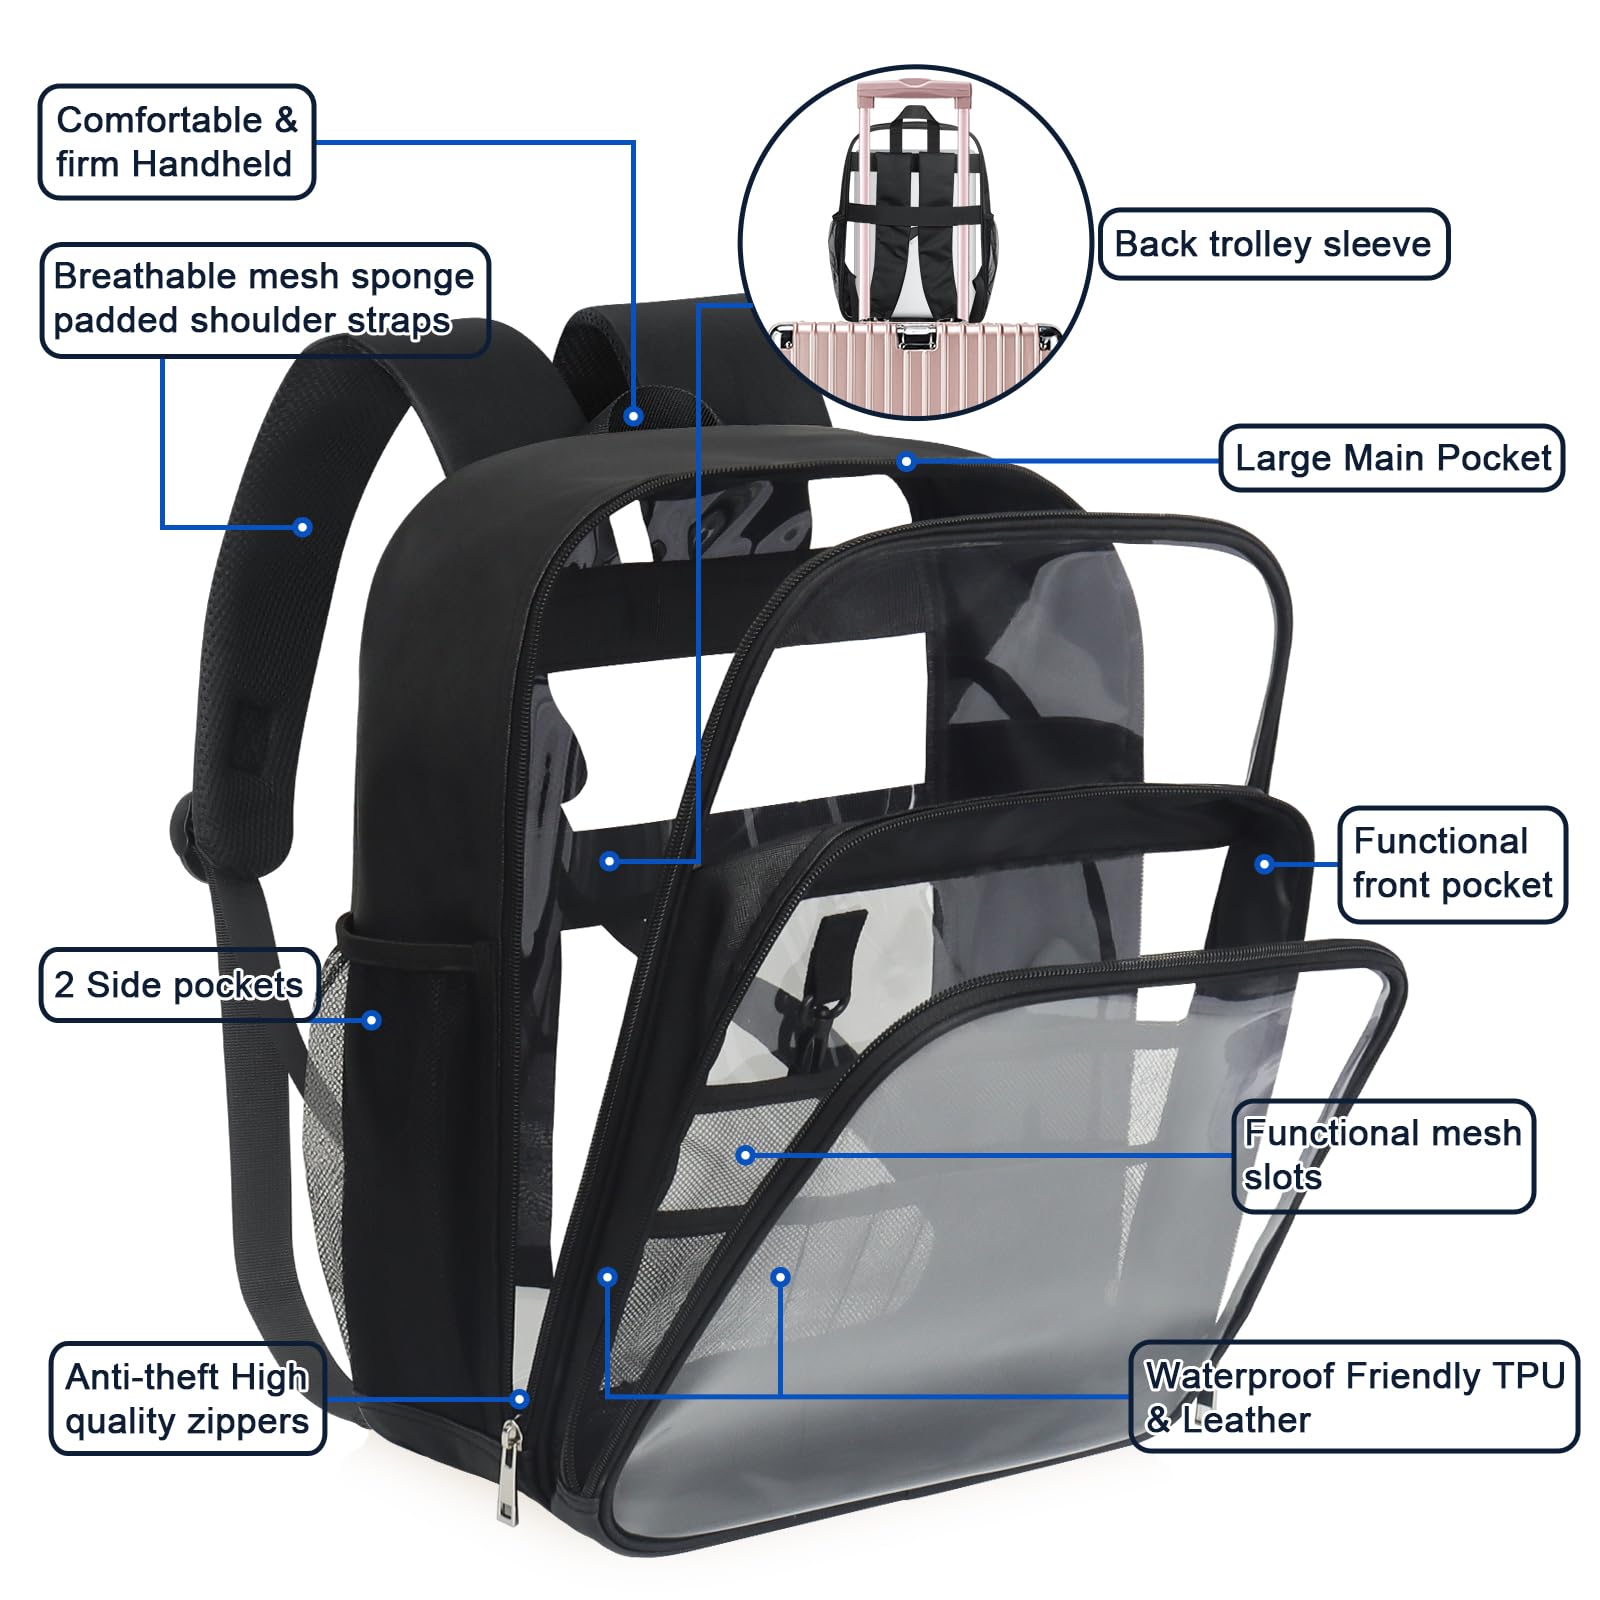 KETIEE Clear Backpack Heavy Duty, Stadium Approved Clear Bag Leather with Trolley Sleeve, Large Waterproof Transparent Backpack for Adults Work Travel Sports Concerts (Black)